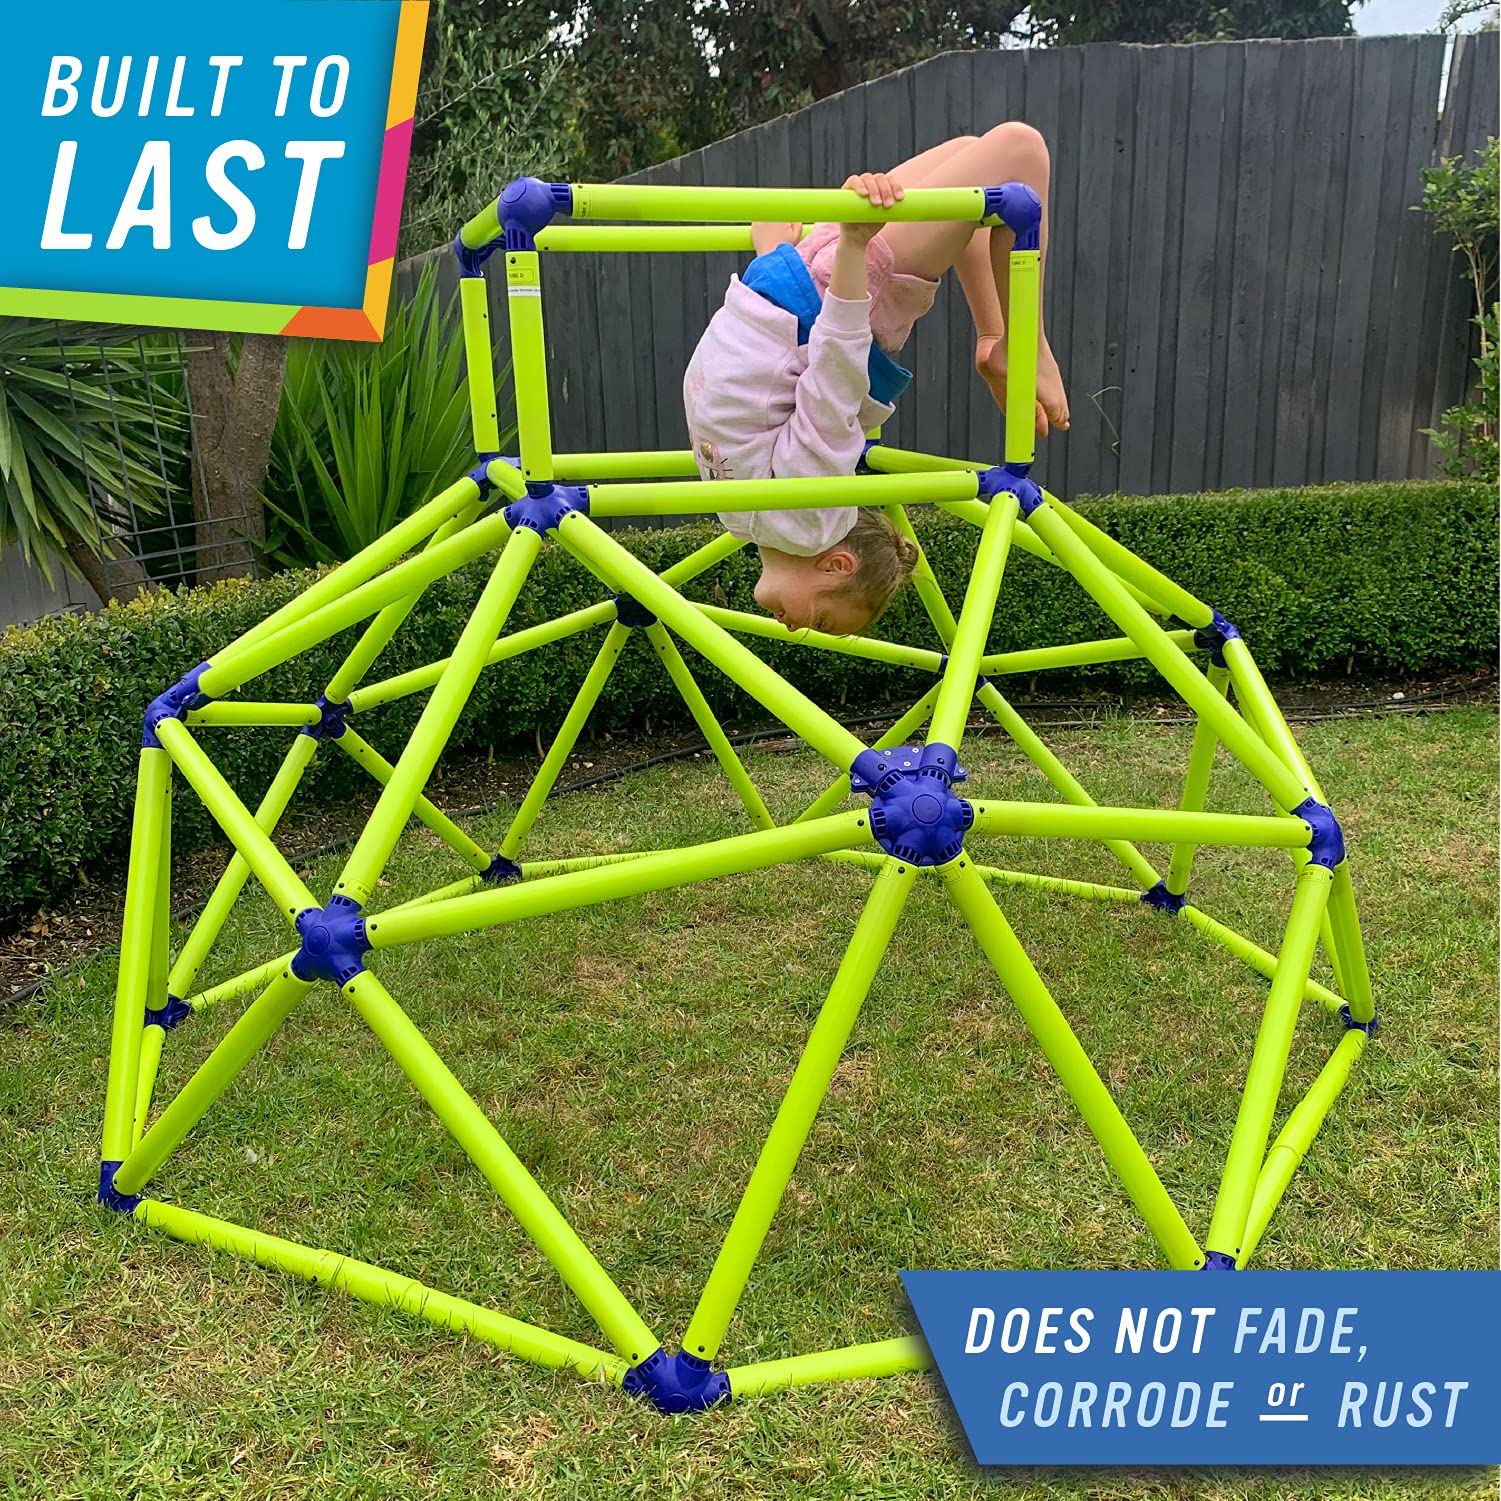 Eezy Peezy Monkey Bars Climbing Tower - Active Outdoor Fun for Kids Ages 3 to 8 Years Old, Green/Blue